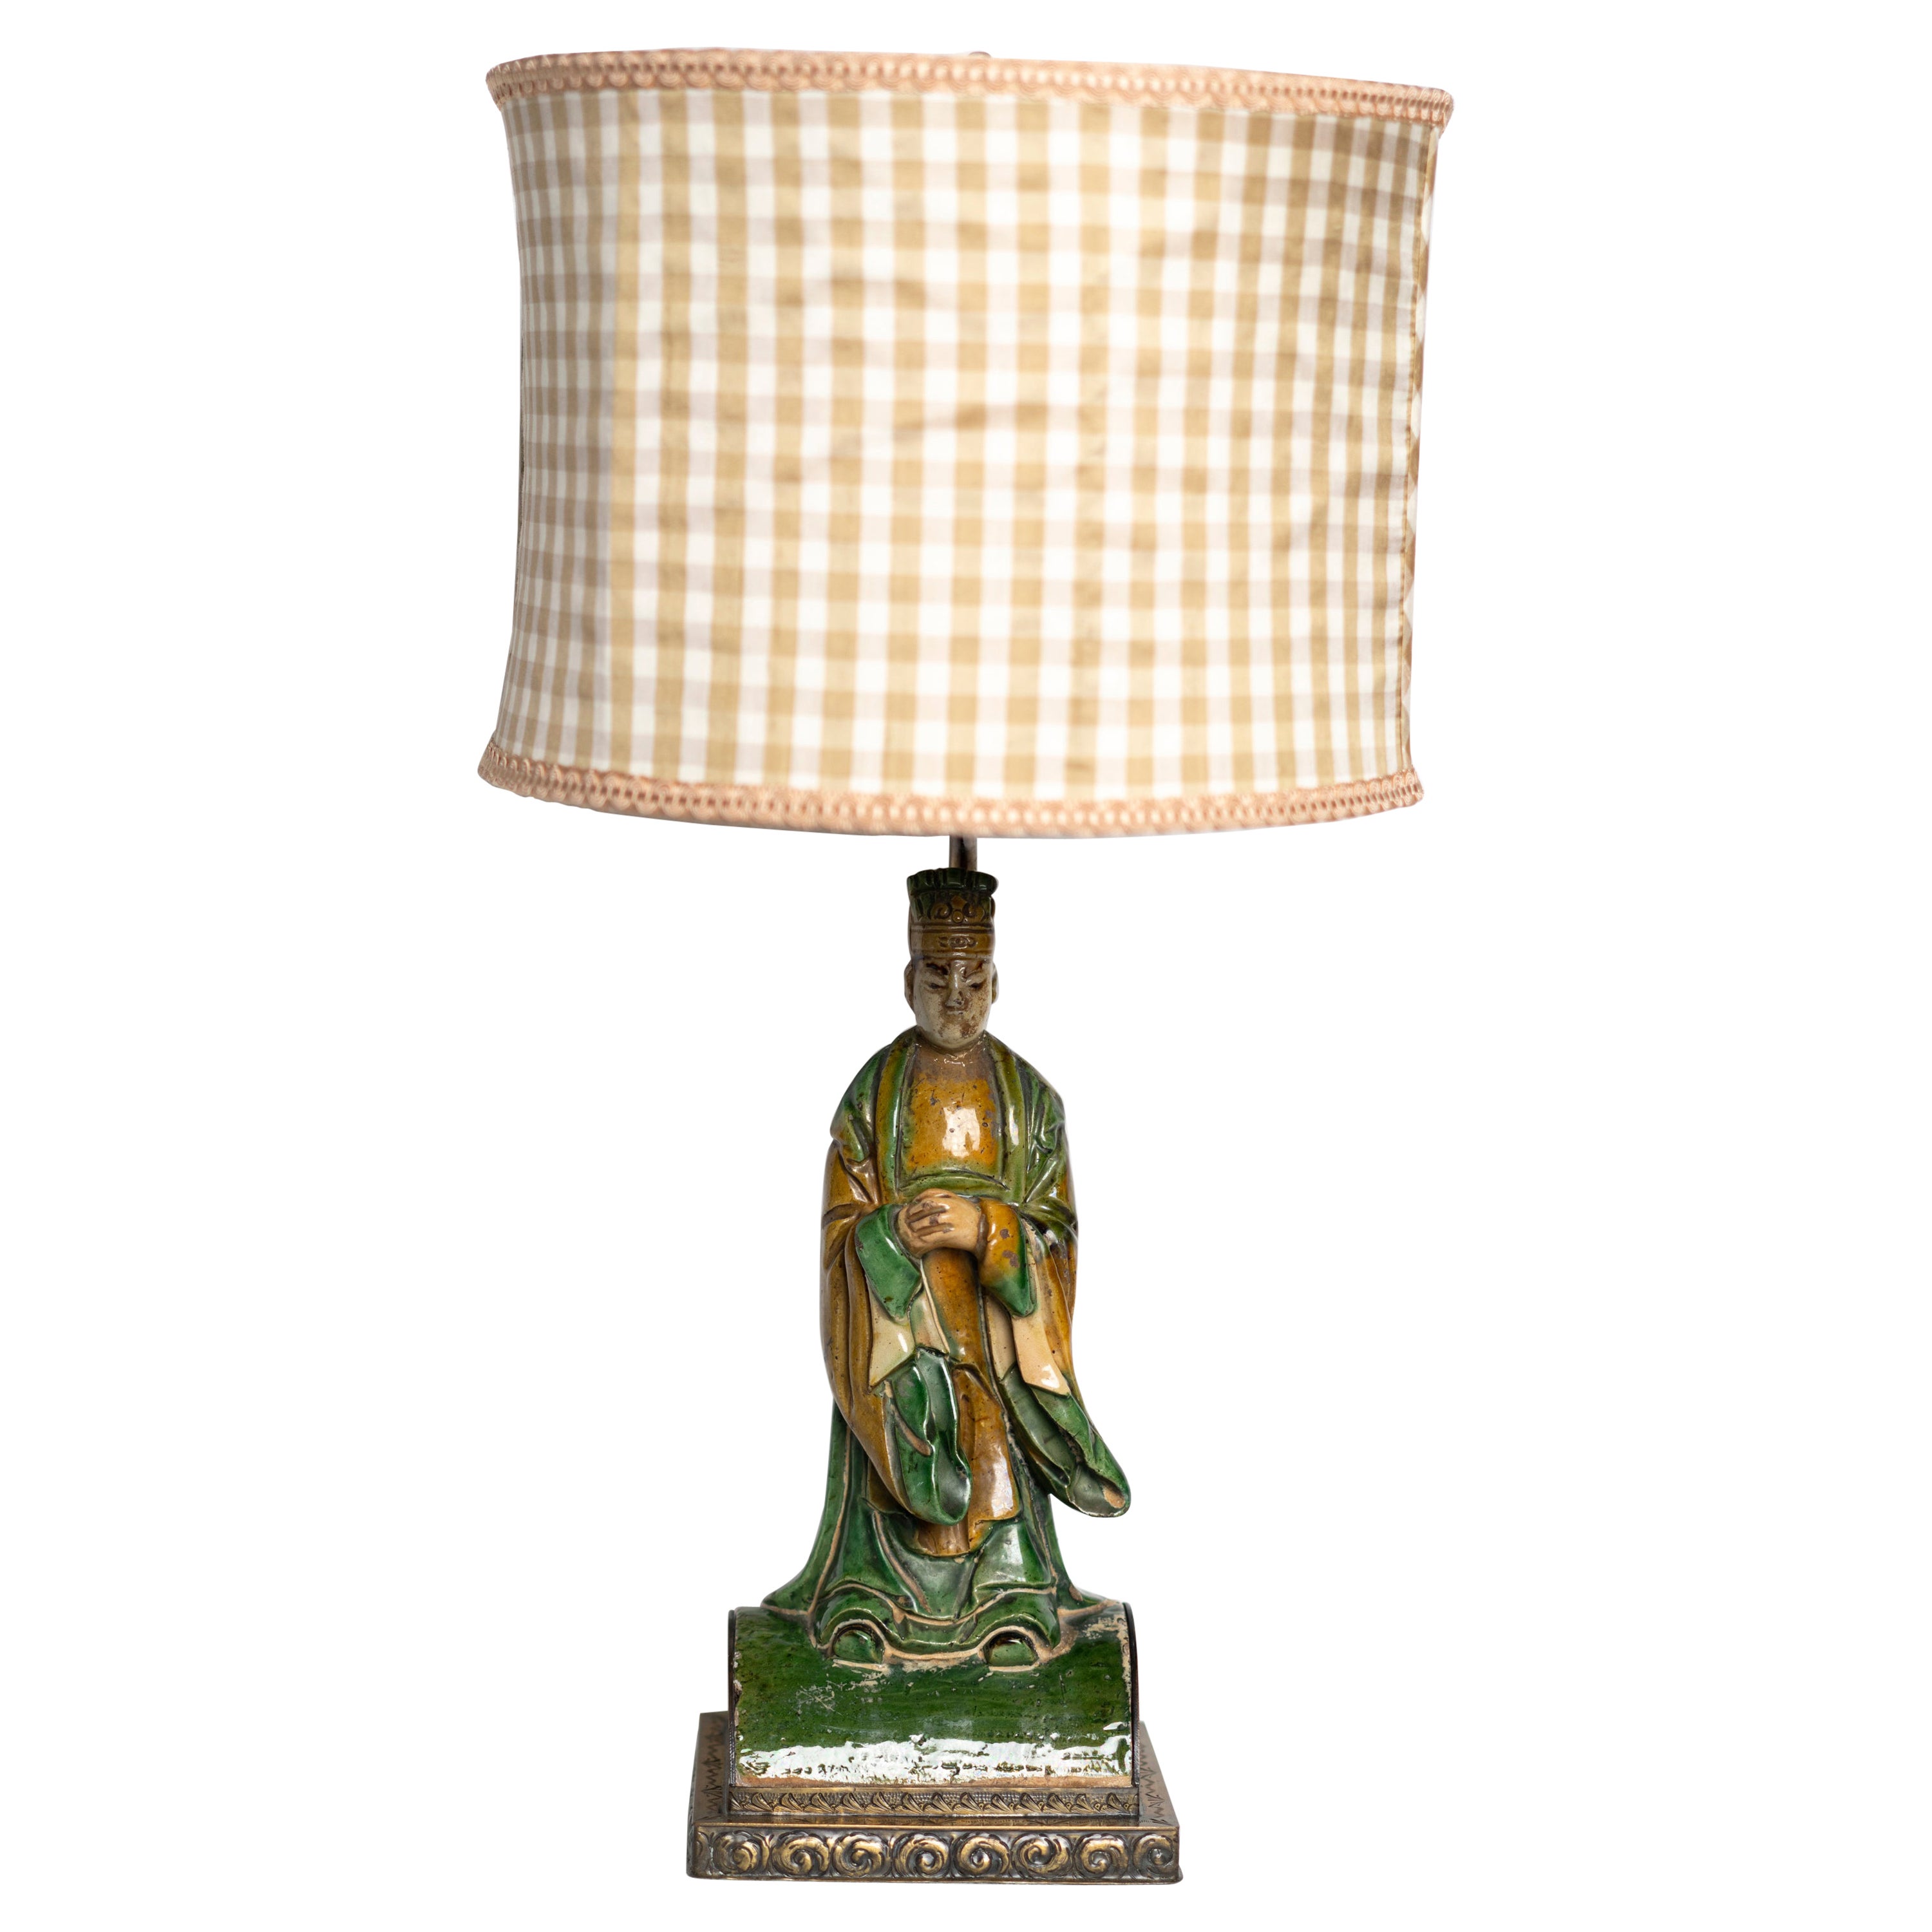 Chinese Ceramic Glazed Figurine Table Lamp in the Tang Dynasty Style